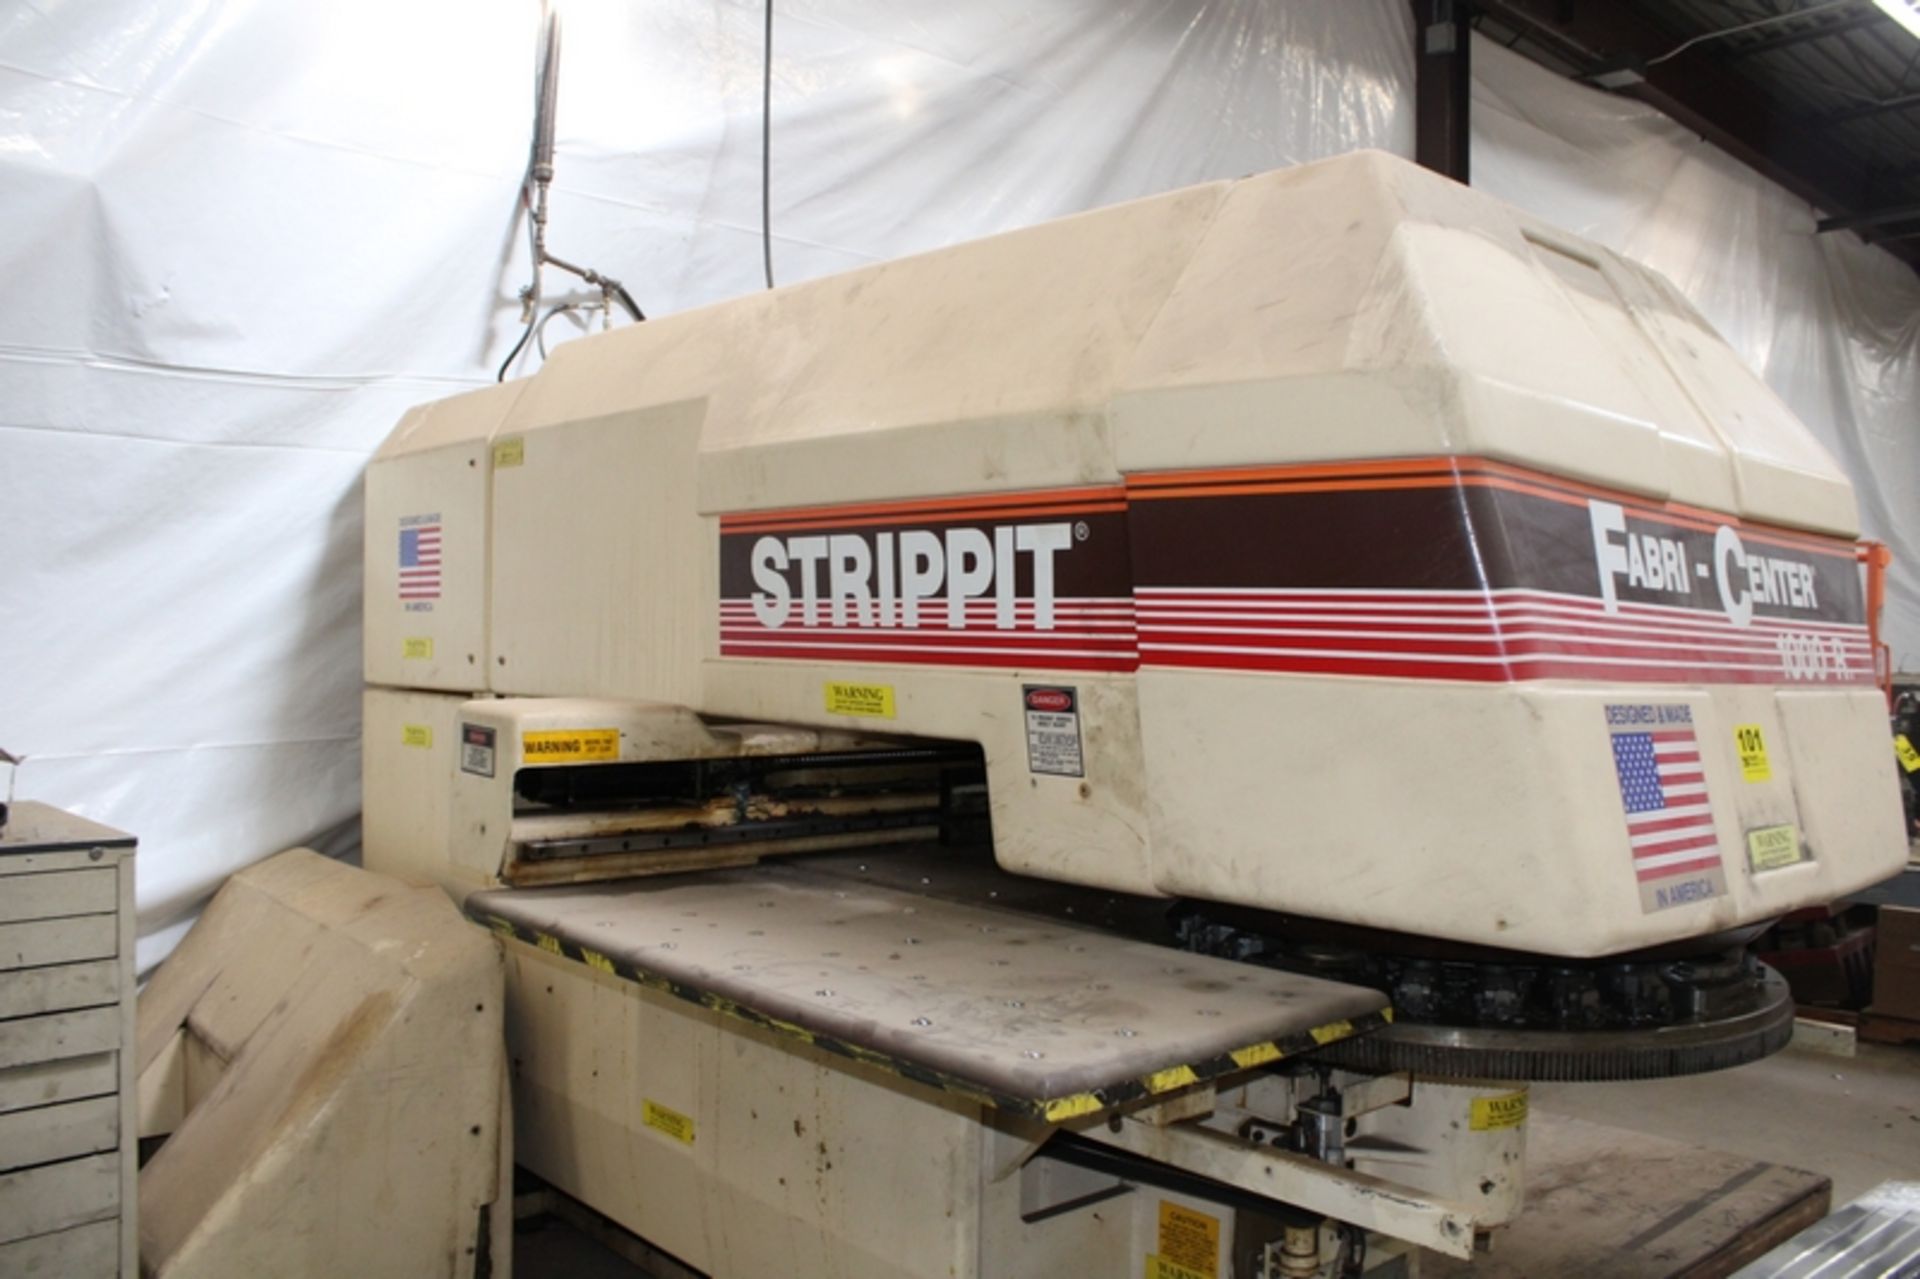 STRIPPIT 30 TON MODEL FABRI-CENTER 1000R CNC TURRET PUNCH, S/N 182013093, 20 PUNCH STATIONS, WITH PC - Image 4 of 9